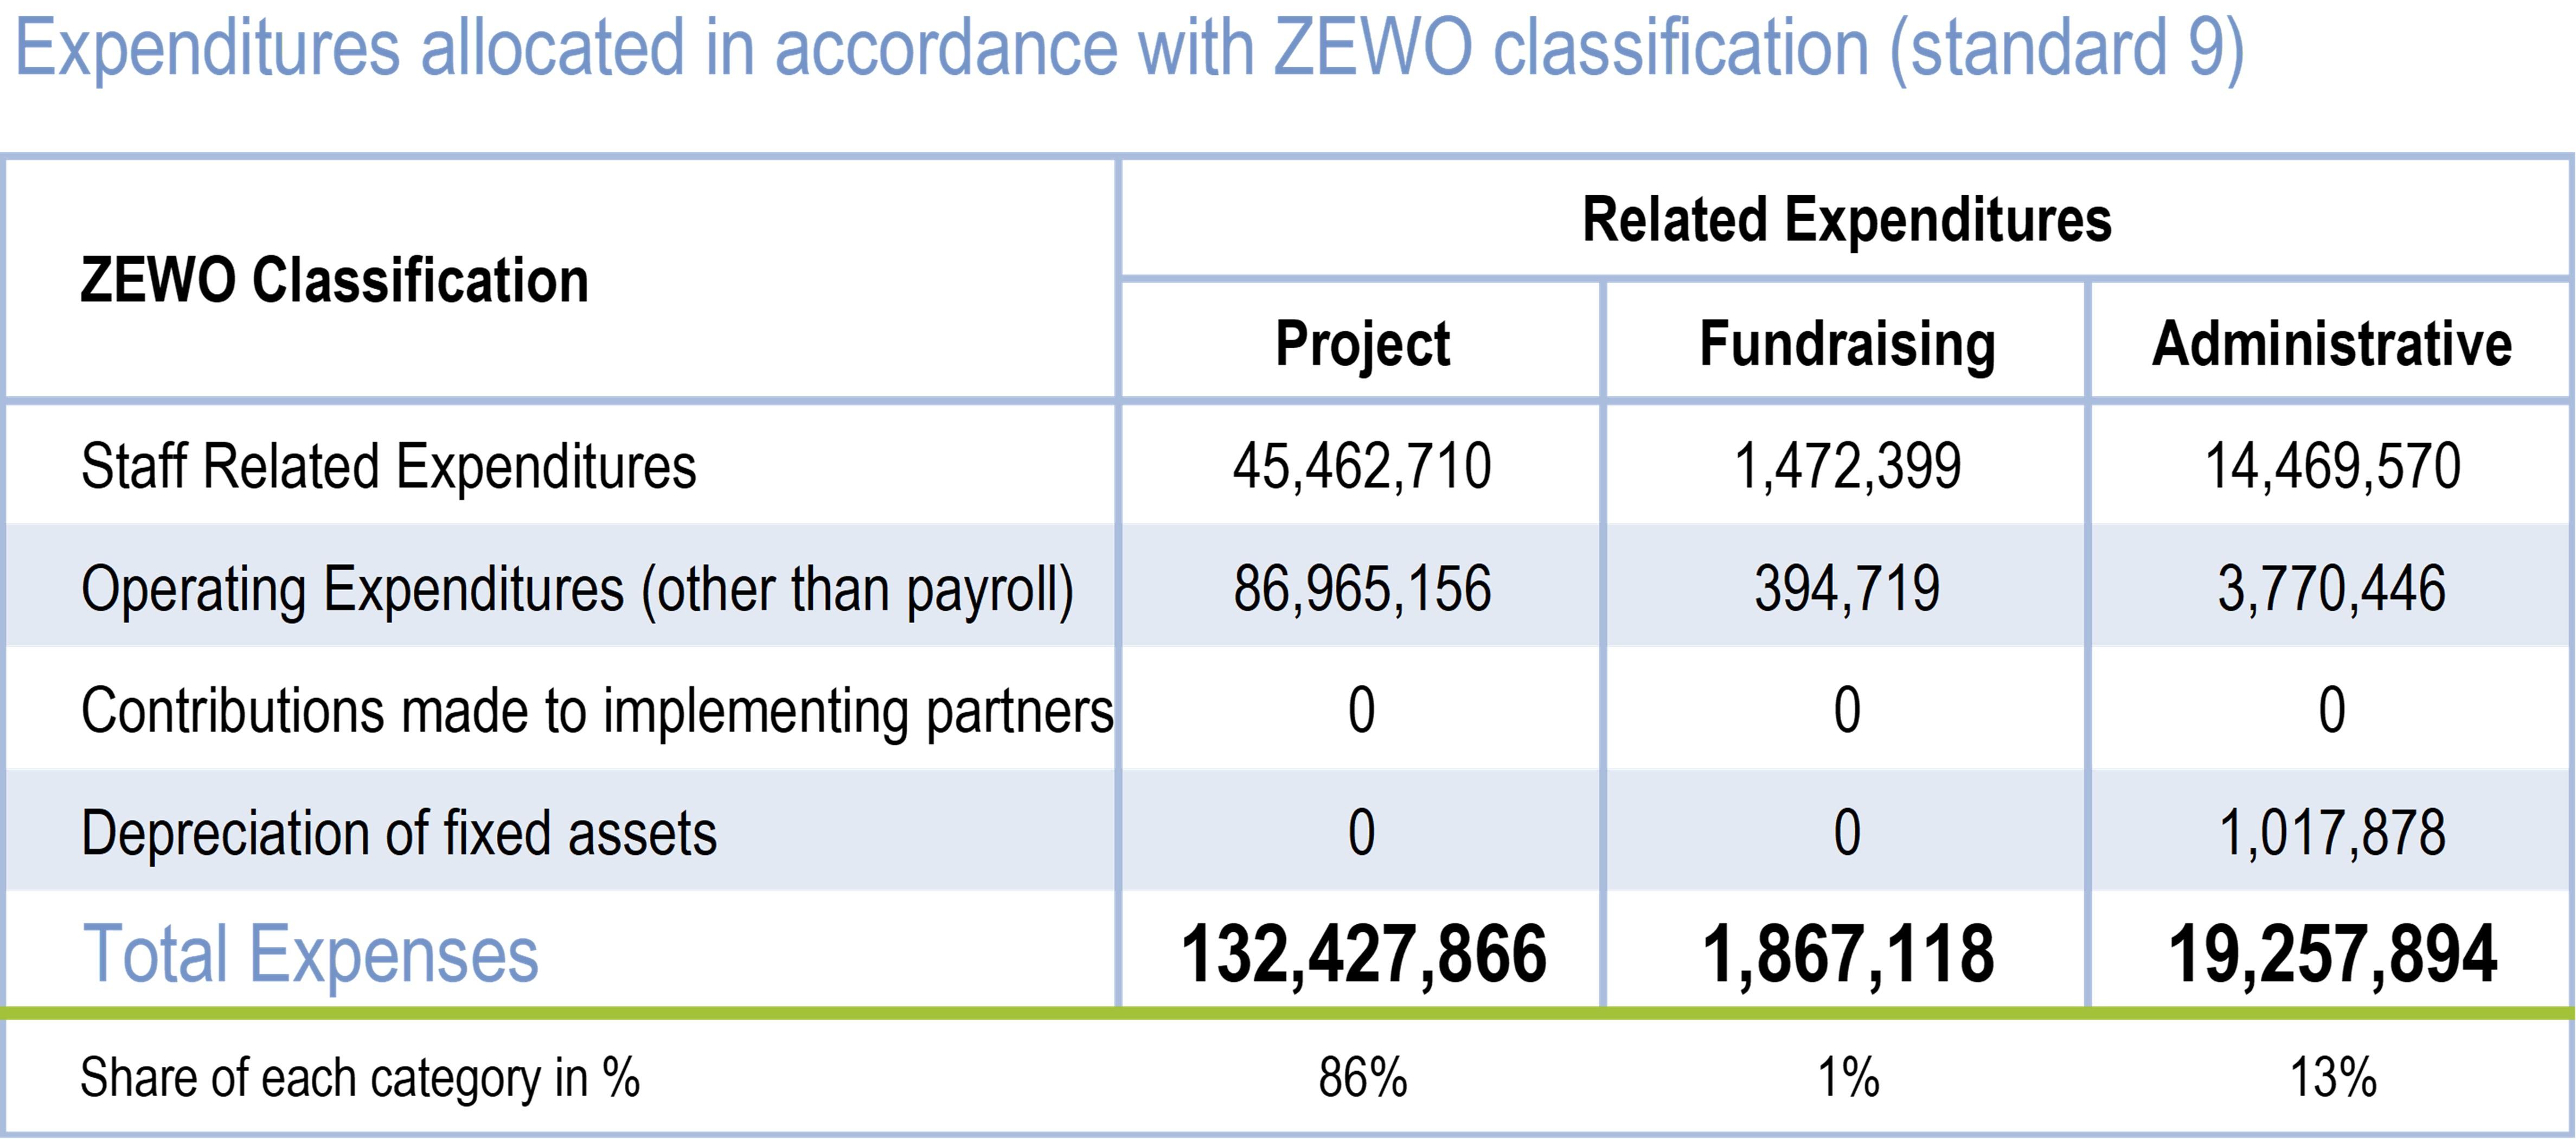 LWF Annual Report 2021 - Expenditure by ZEWO Classification